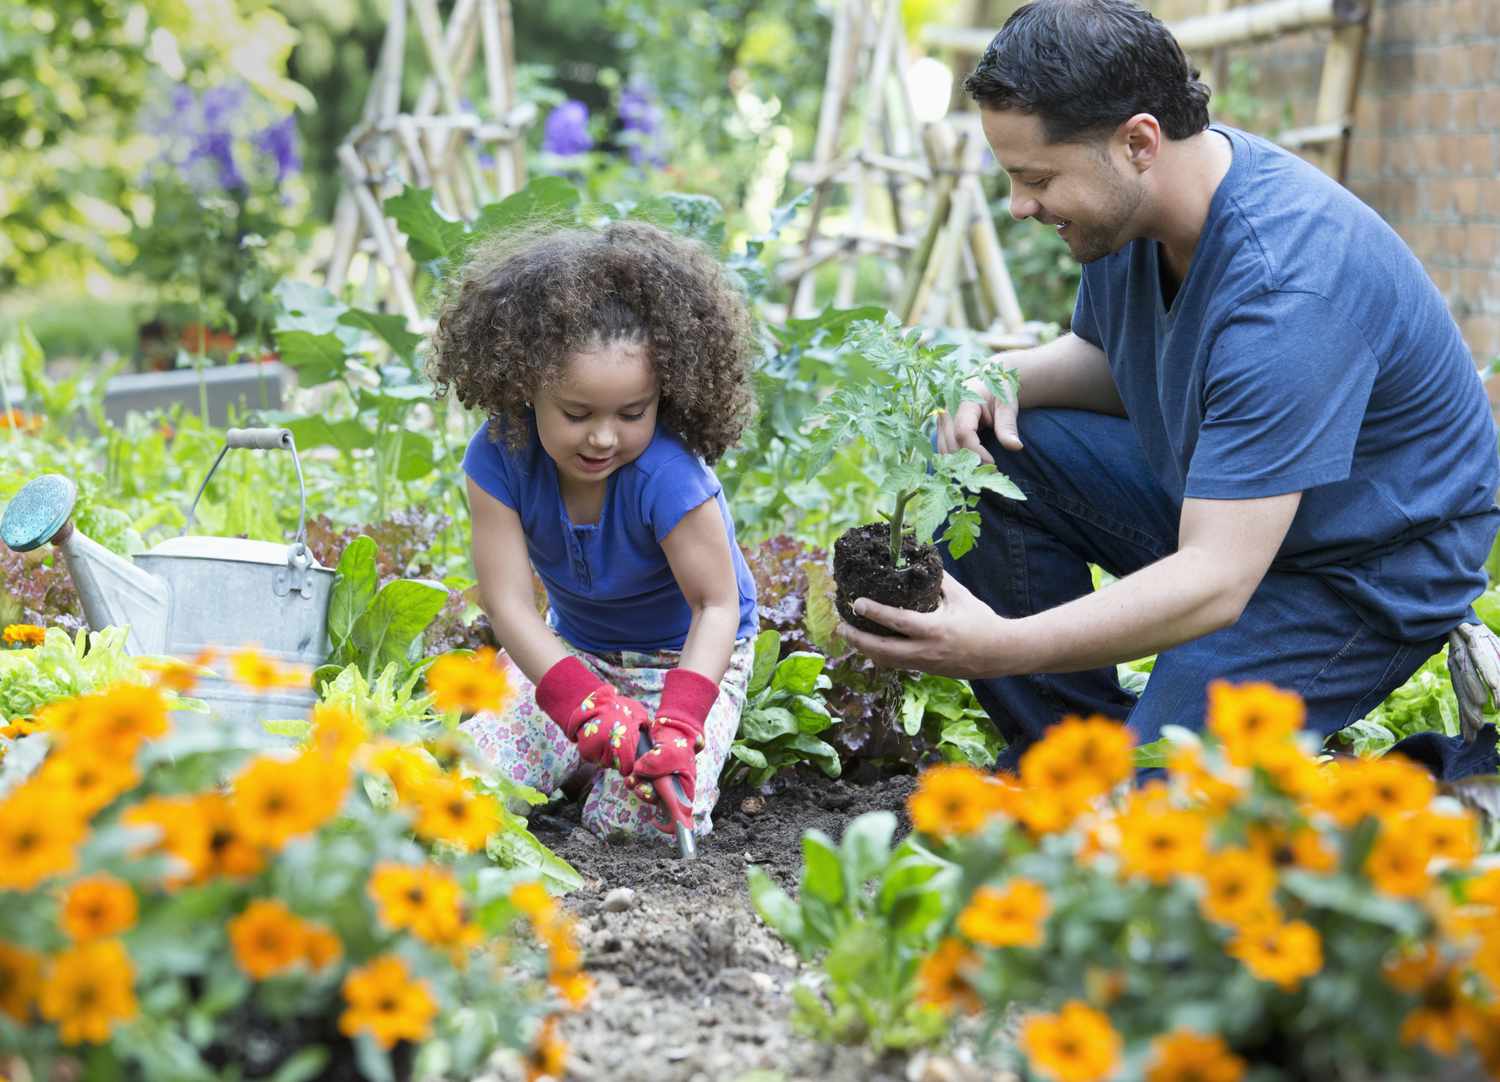 Gardening care services to get your outside area looking good for summer